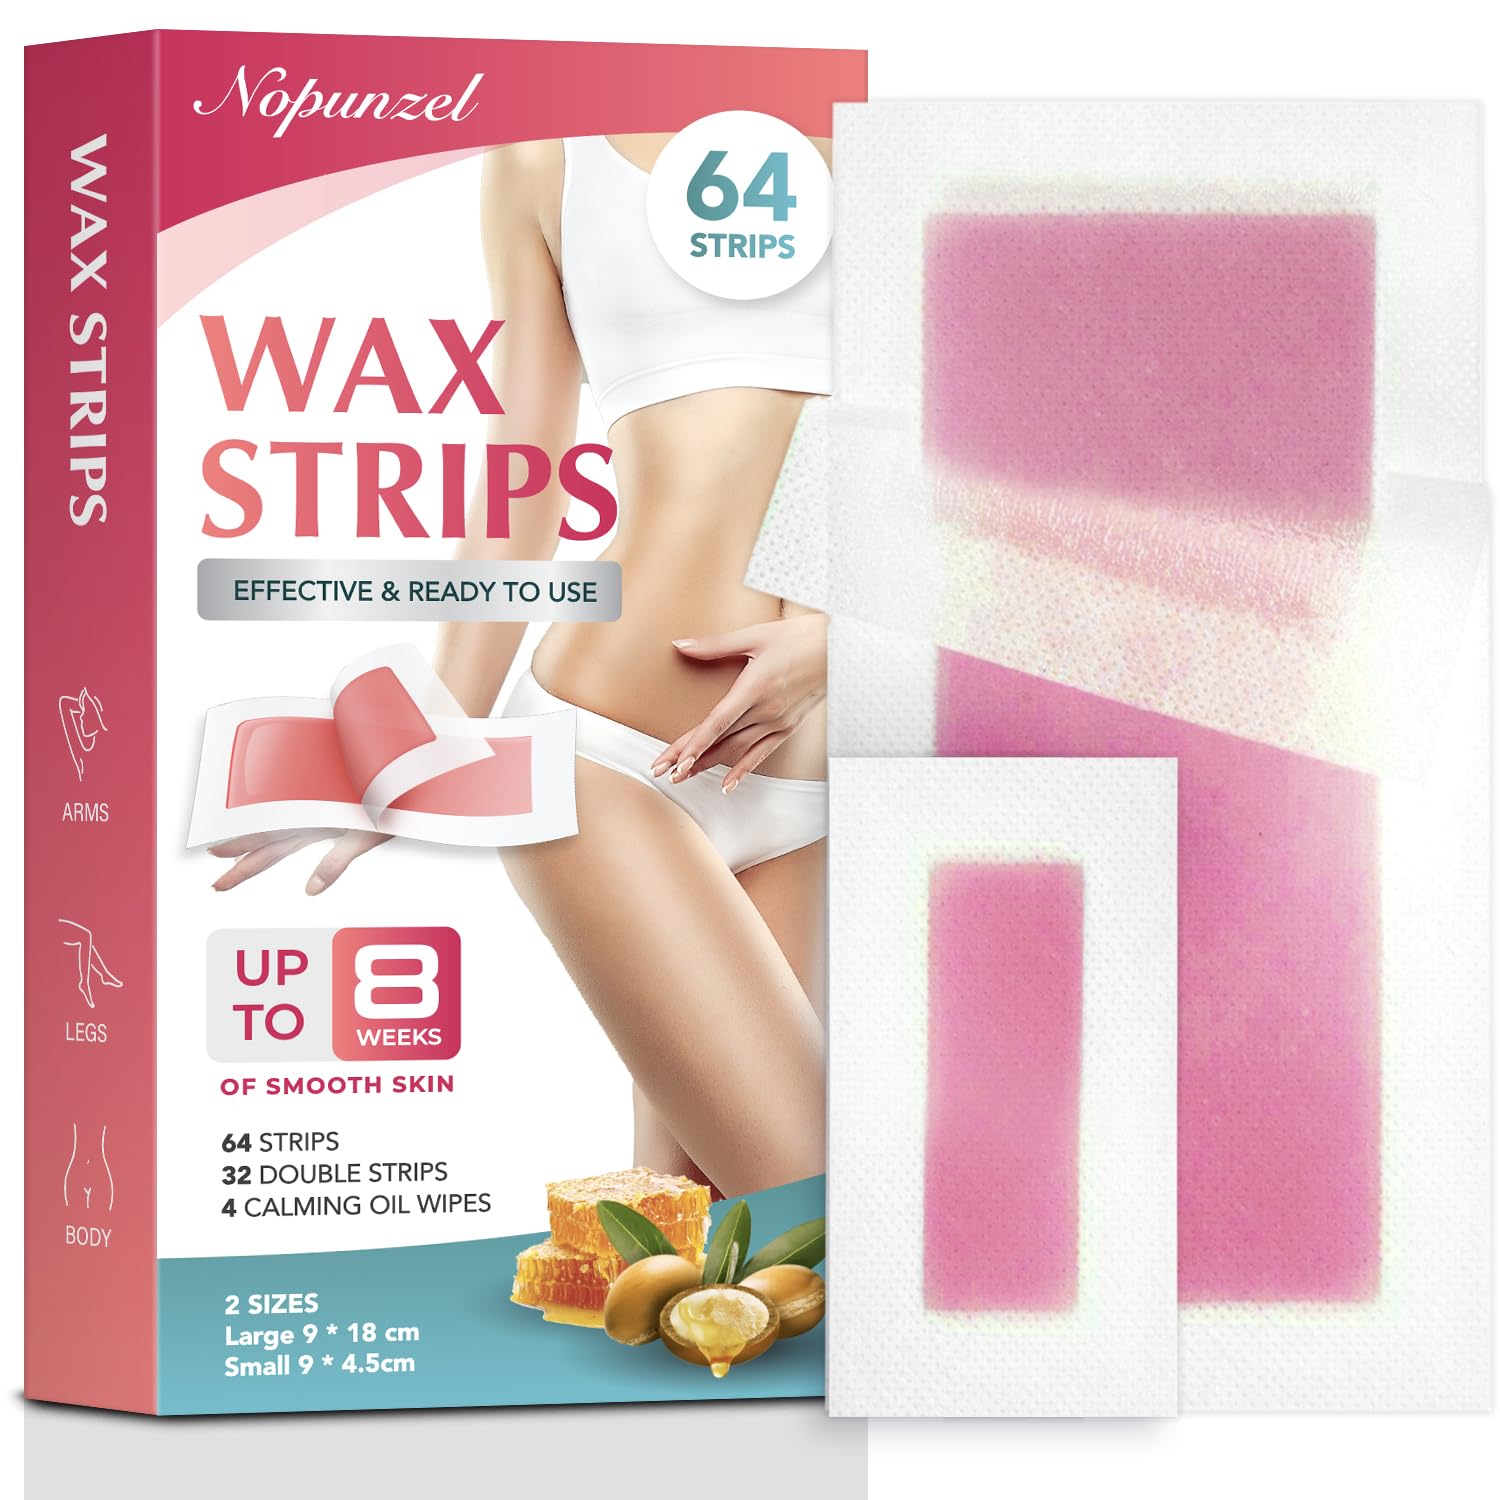 Wax Strips 64 counts, Wax Strips for Hair Removal, Waxing Strips, Bikini Wax, Bikini Wax Kit, Wax Strips for Brazilian Waxing, Waxing Strips for Body, Legs, Arms, Chest - 4 Wipes (2 Sizes) (64 Count)